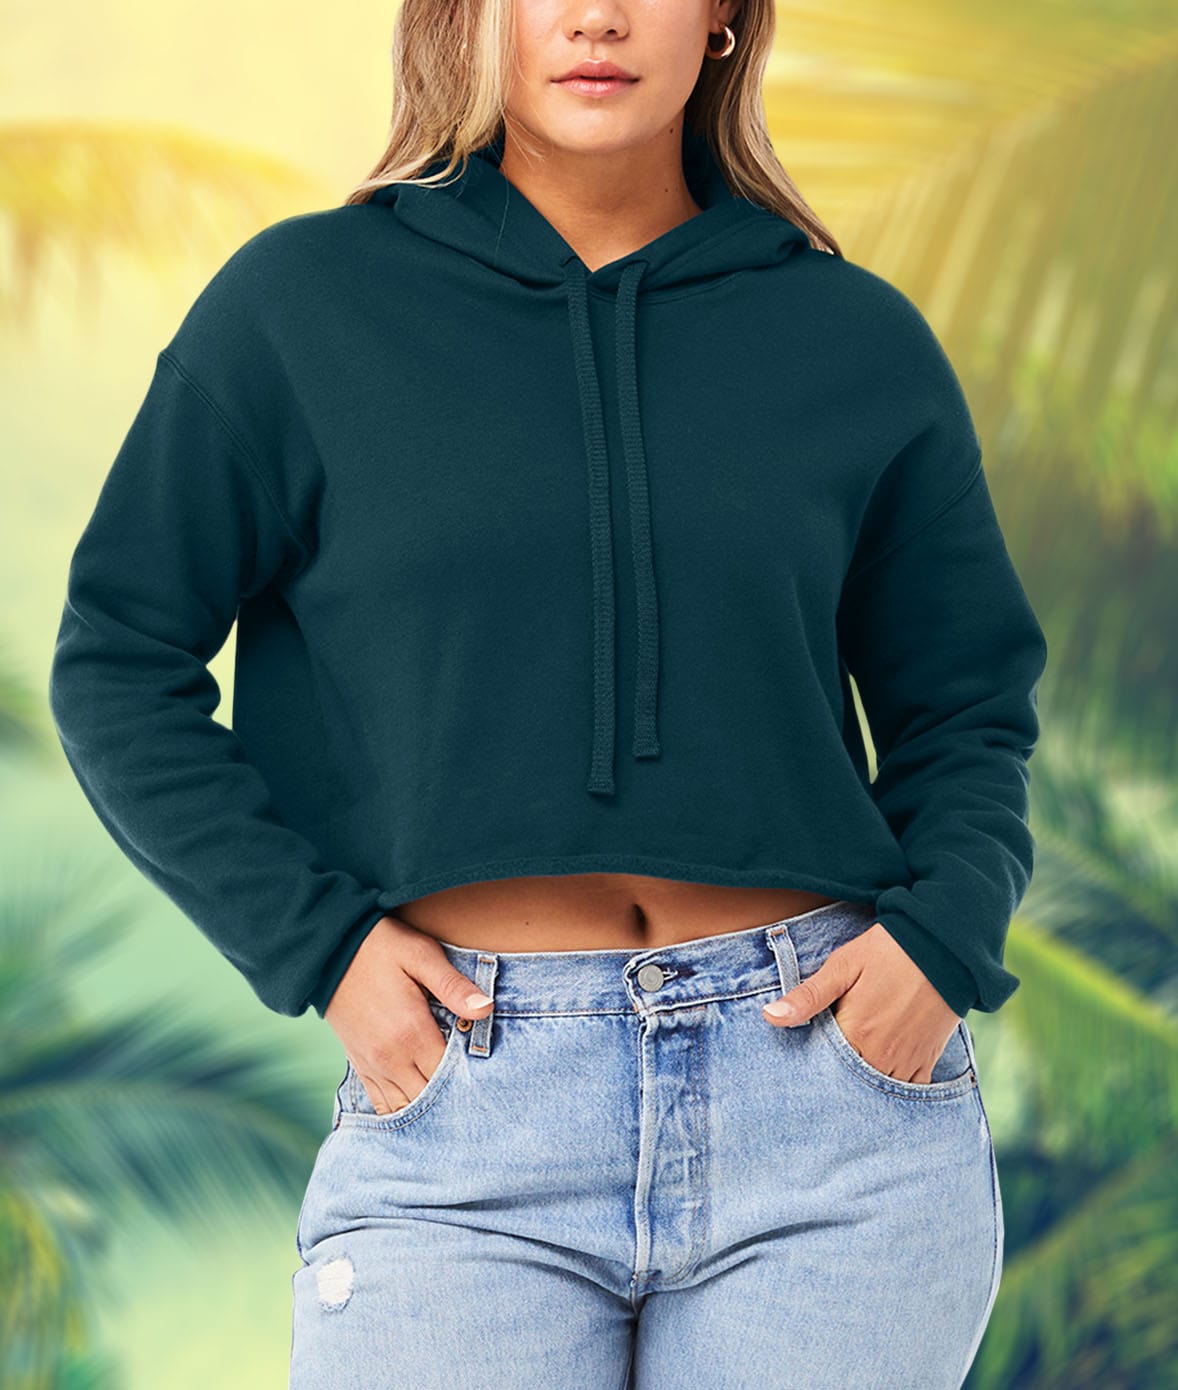 Women's Ridiculously Soft Cropped Hoodie Worn by Model